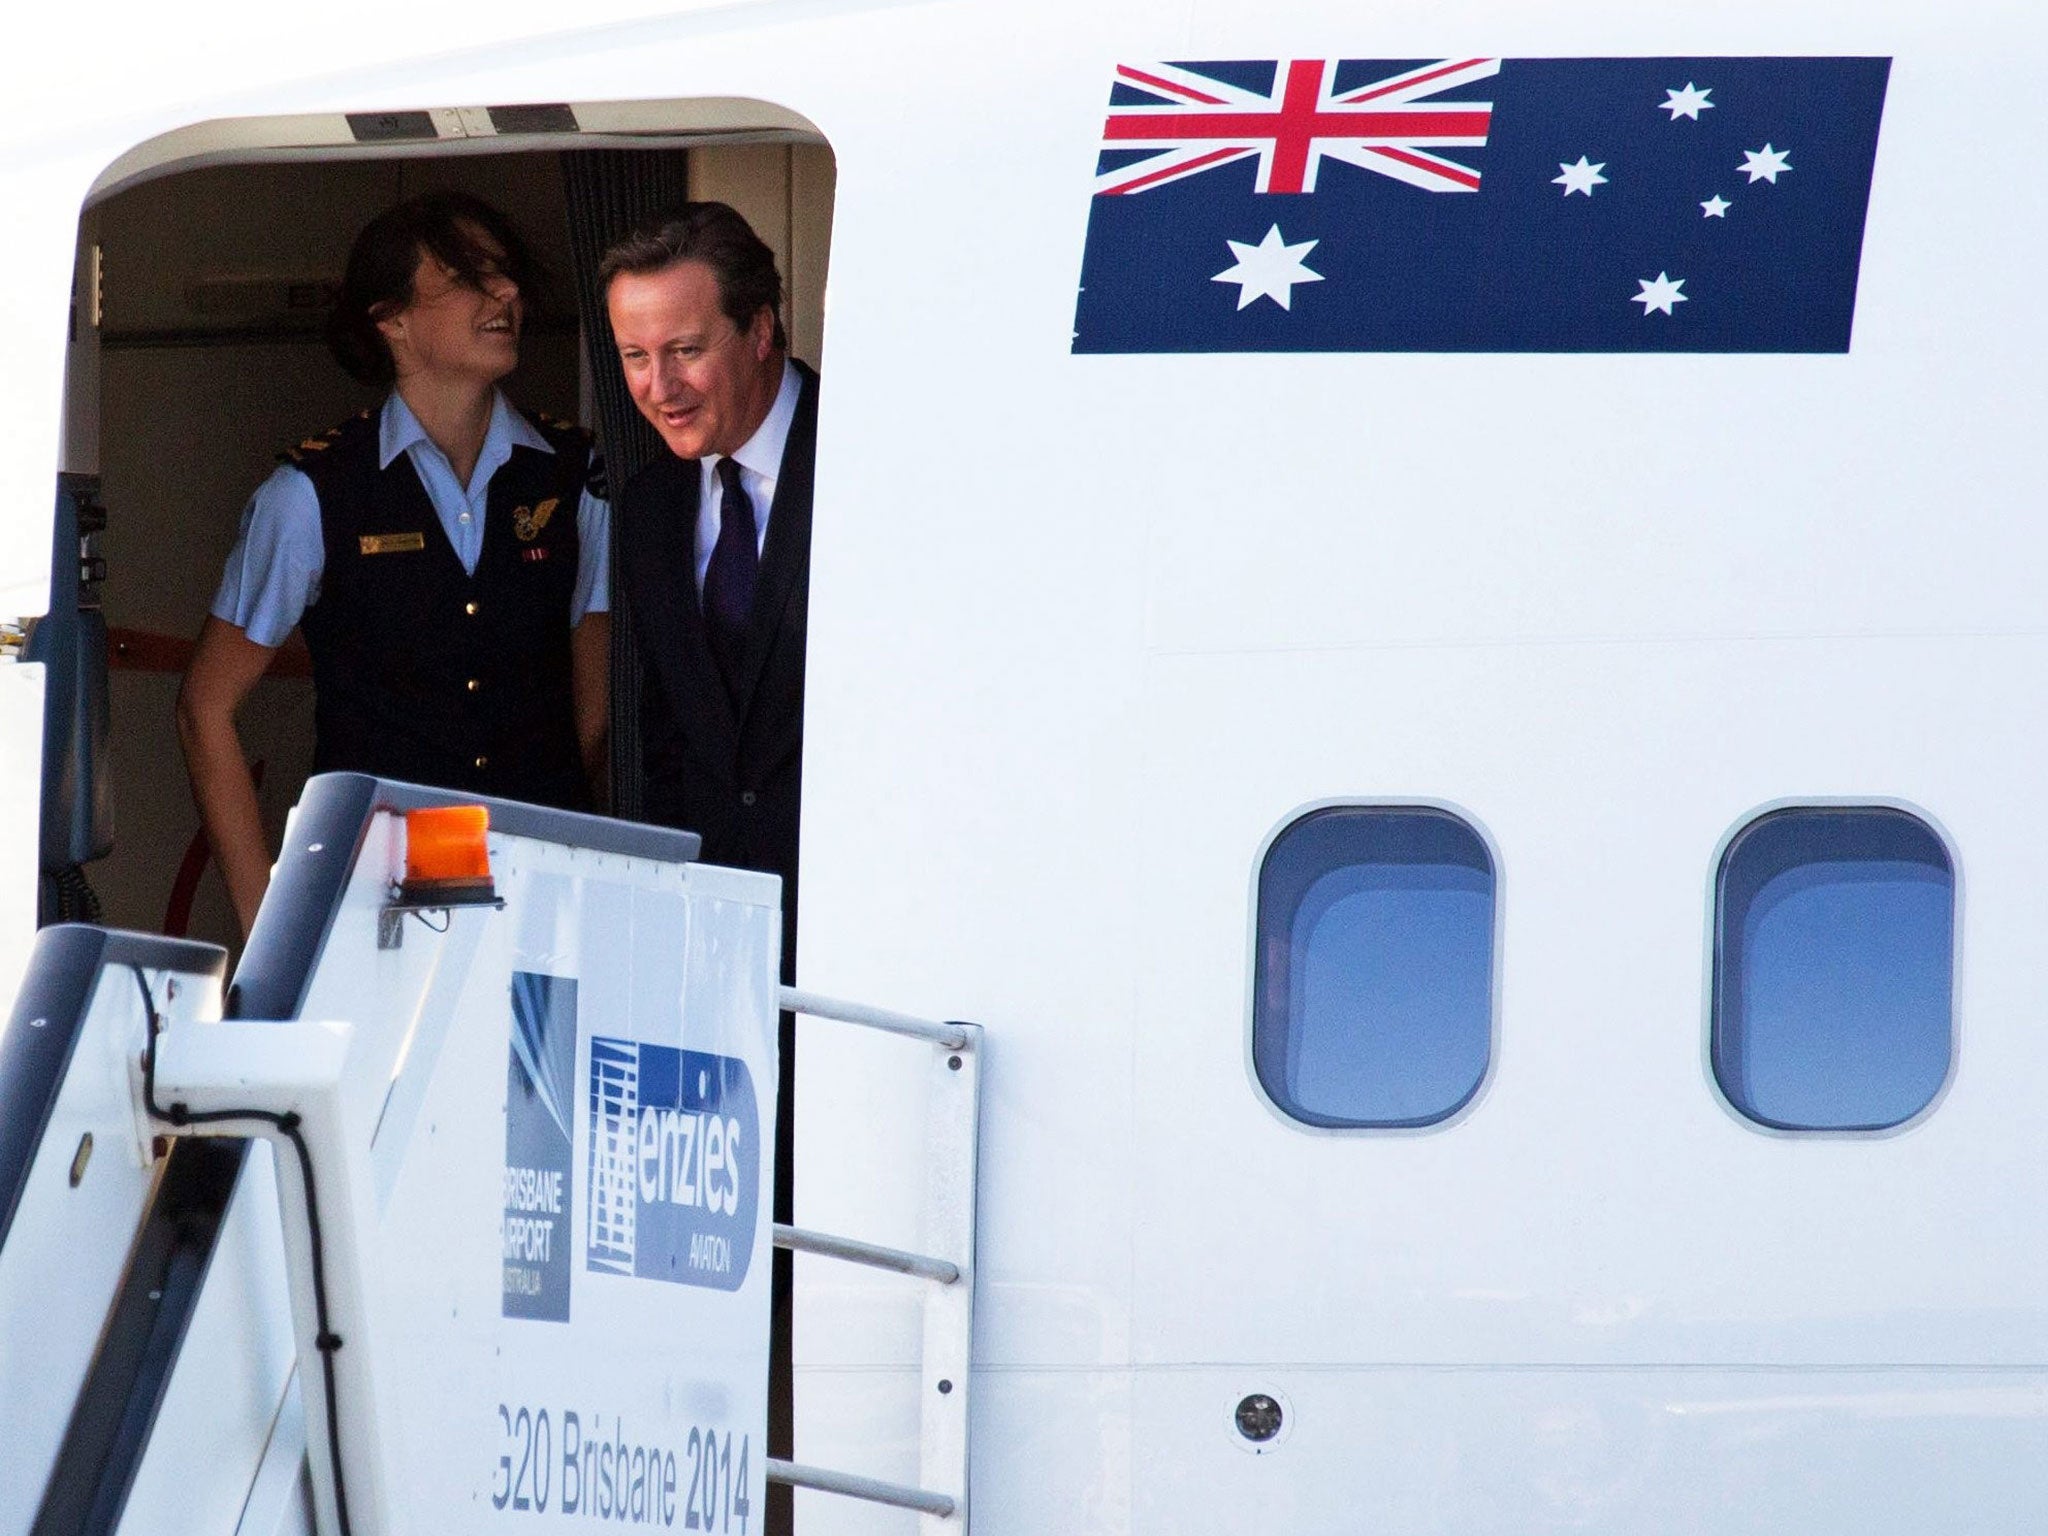 David Cameron lands in Brisbane for the G20 summit